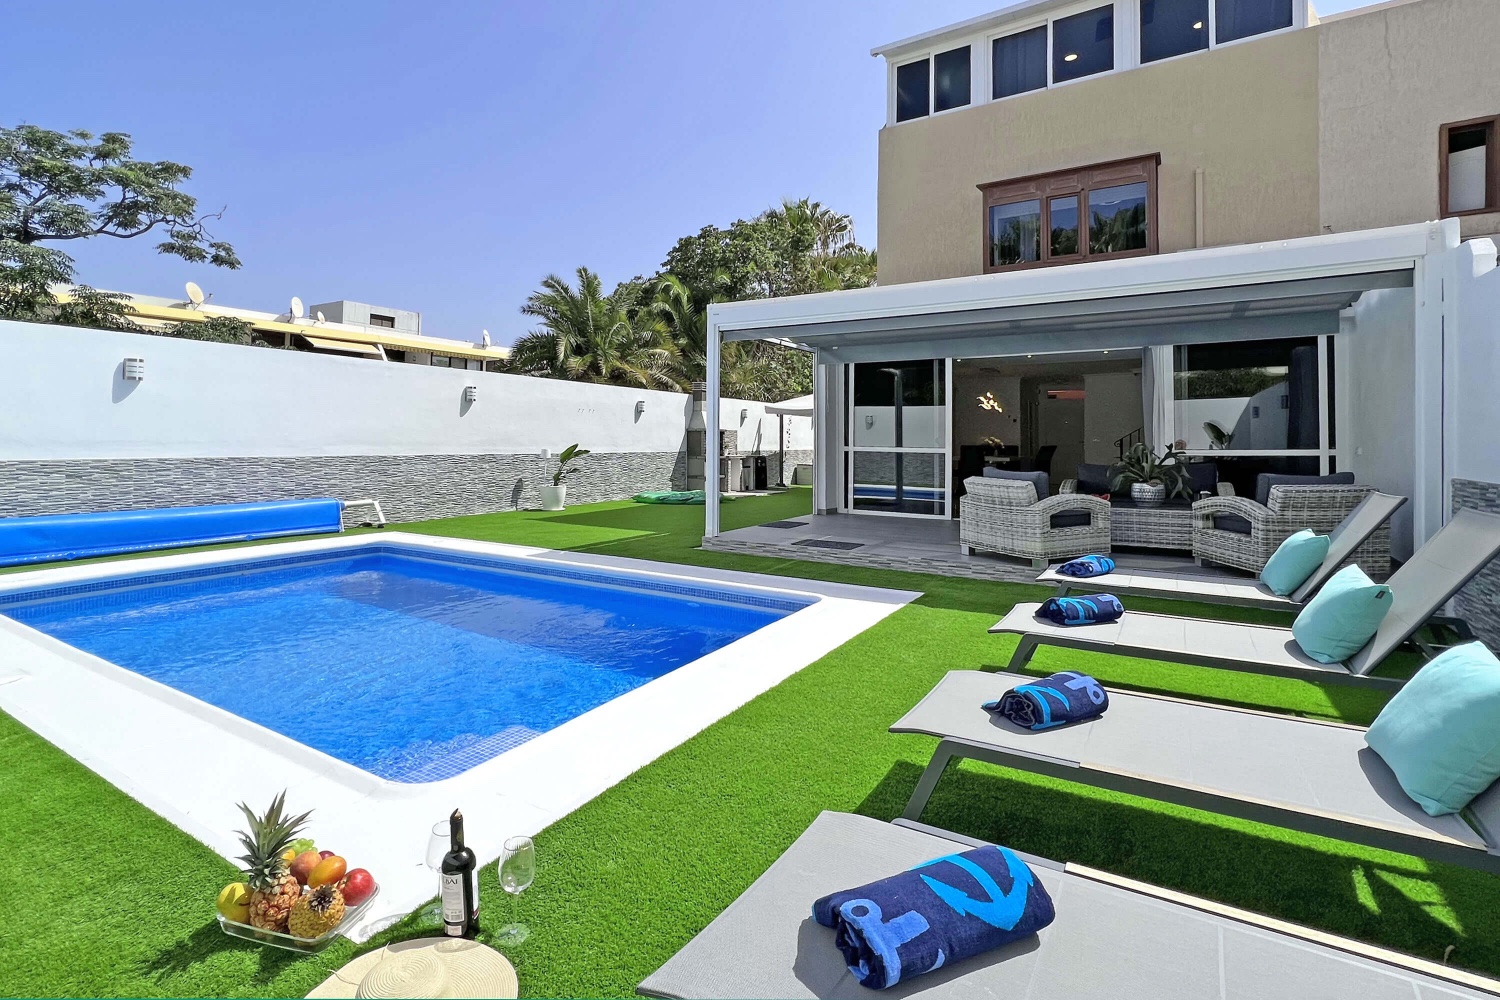 Great and modern holiday home just 50 meters from the sea, with private pool, barbecue and private garage.